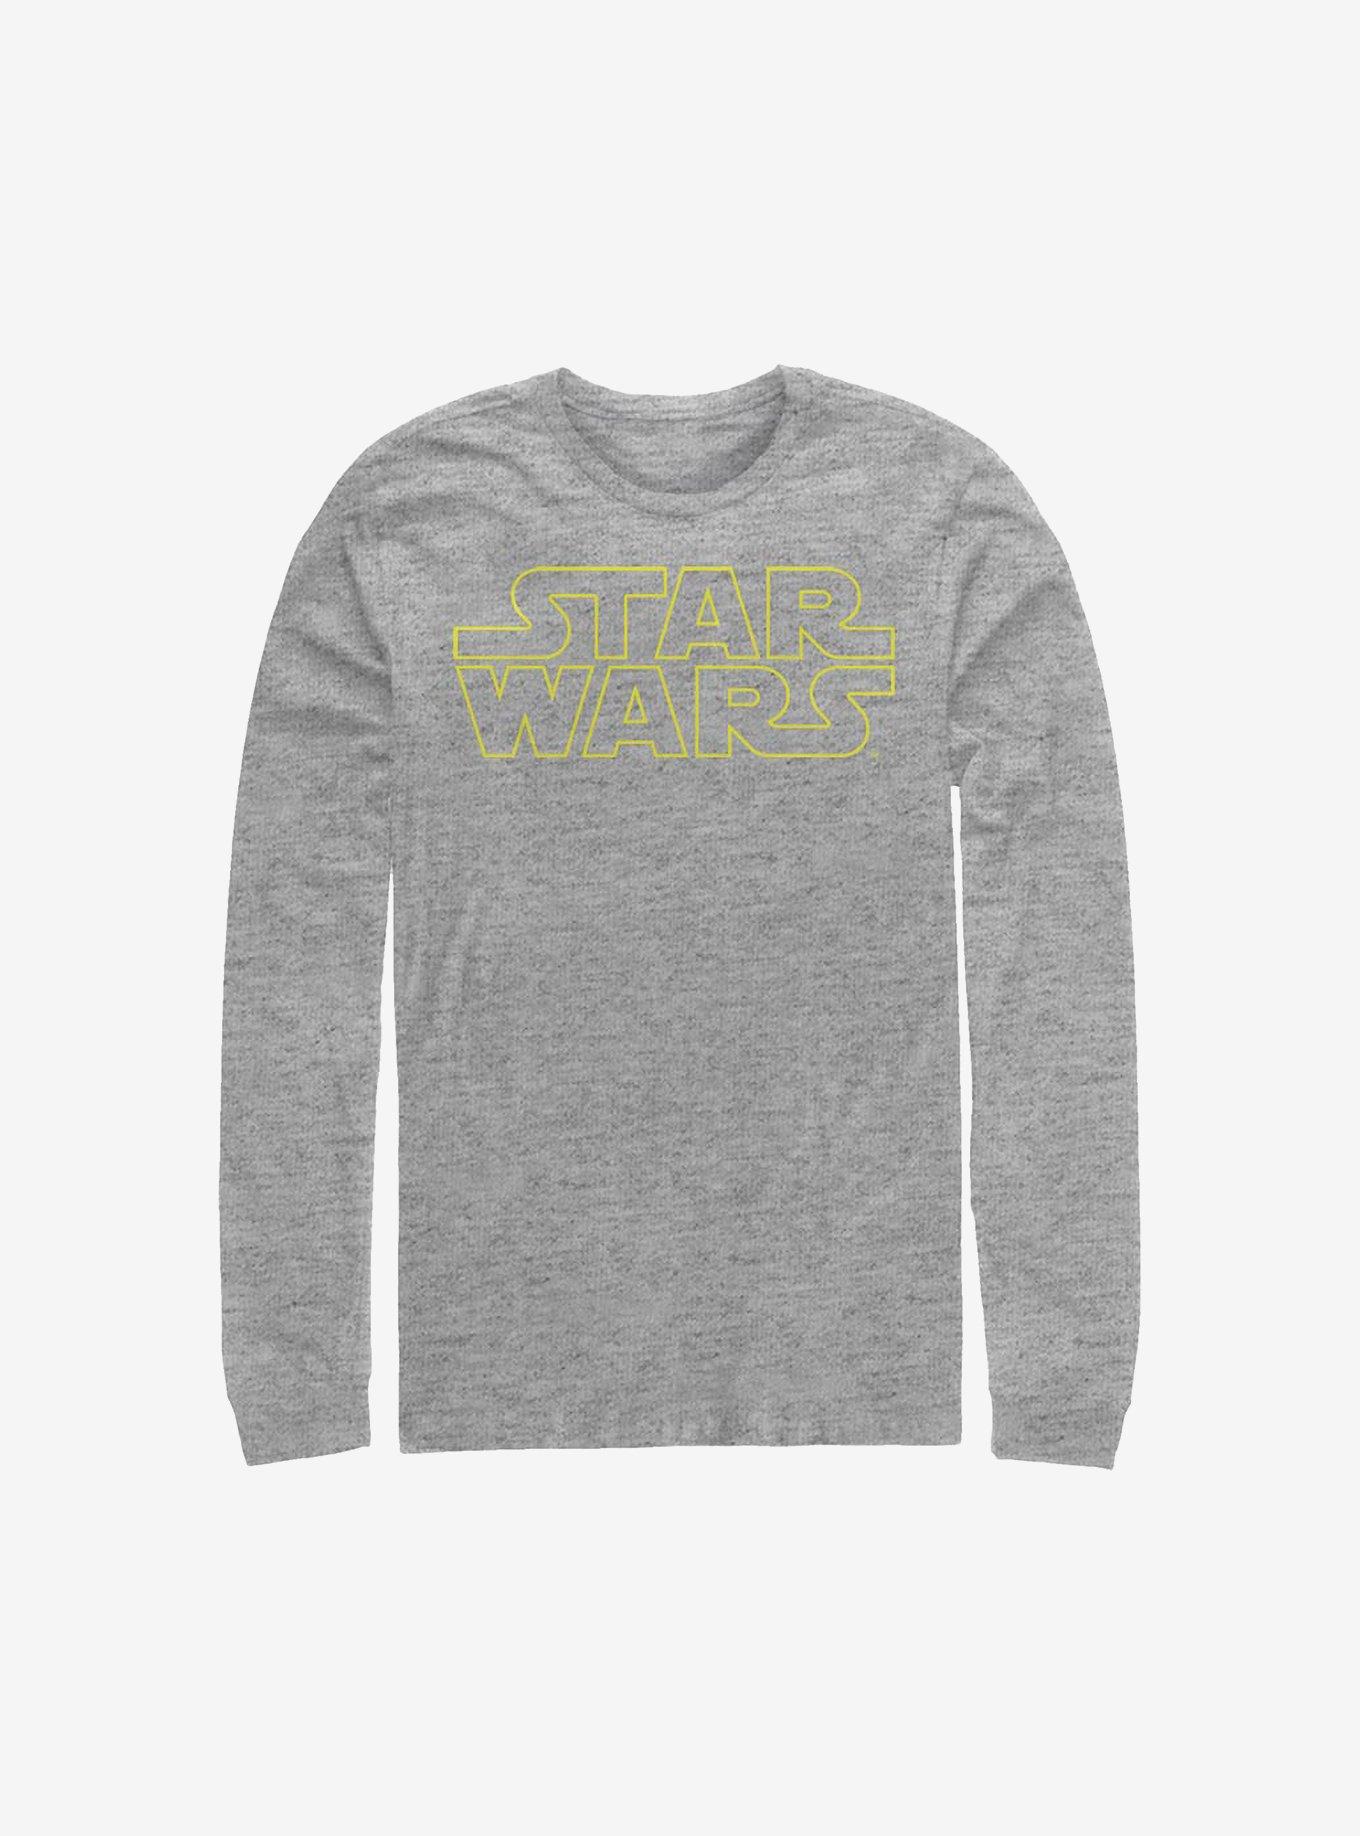 Star Wars Simplified Long-Sleeve T-Shirt, ATH HTR, hi-res